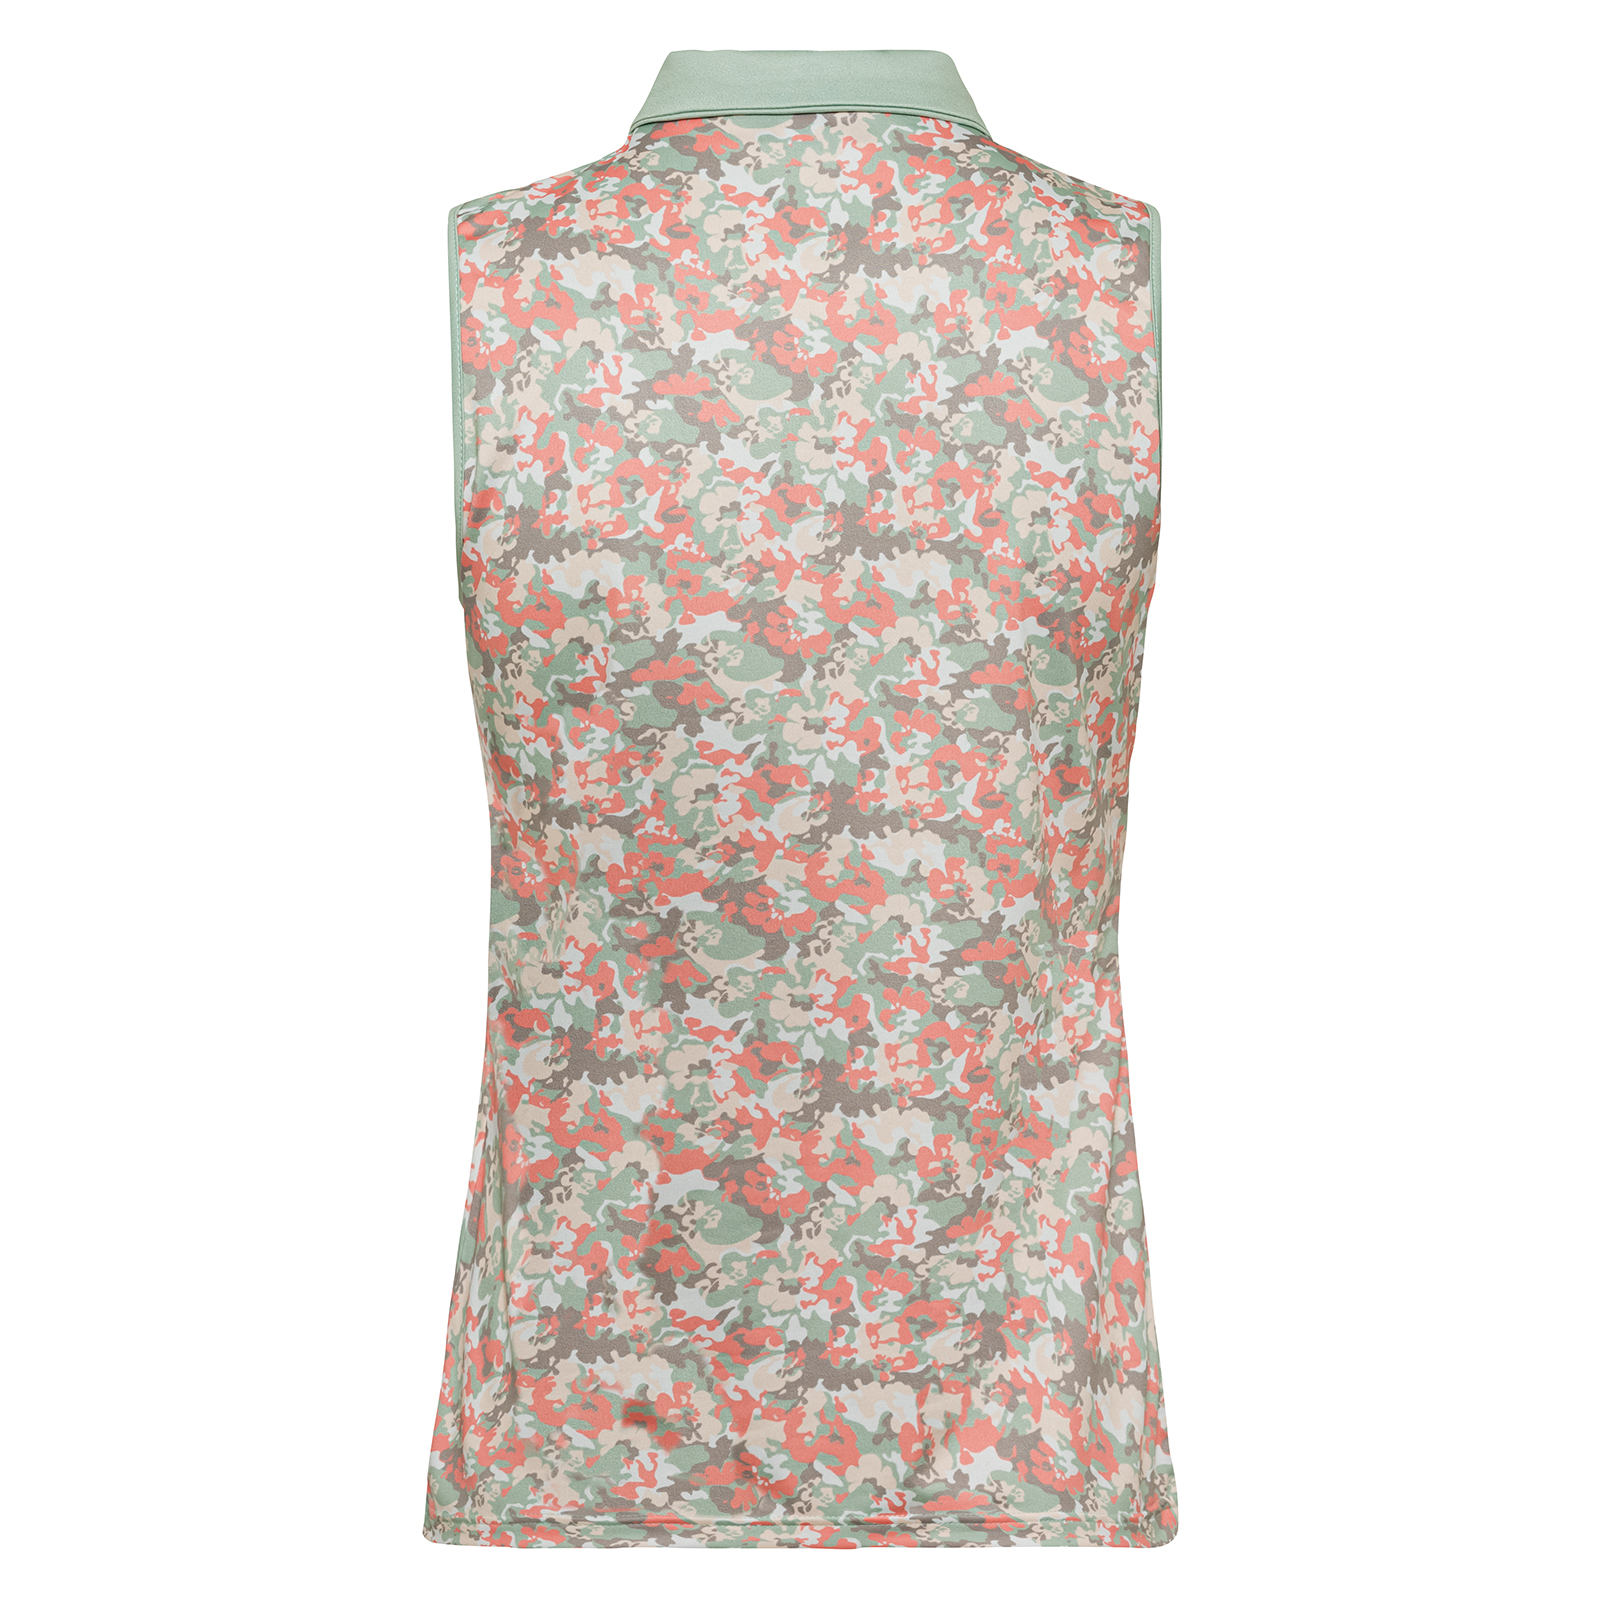 Attractively patterned, sleeveless ladies' shirt